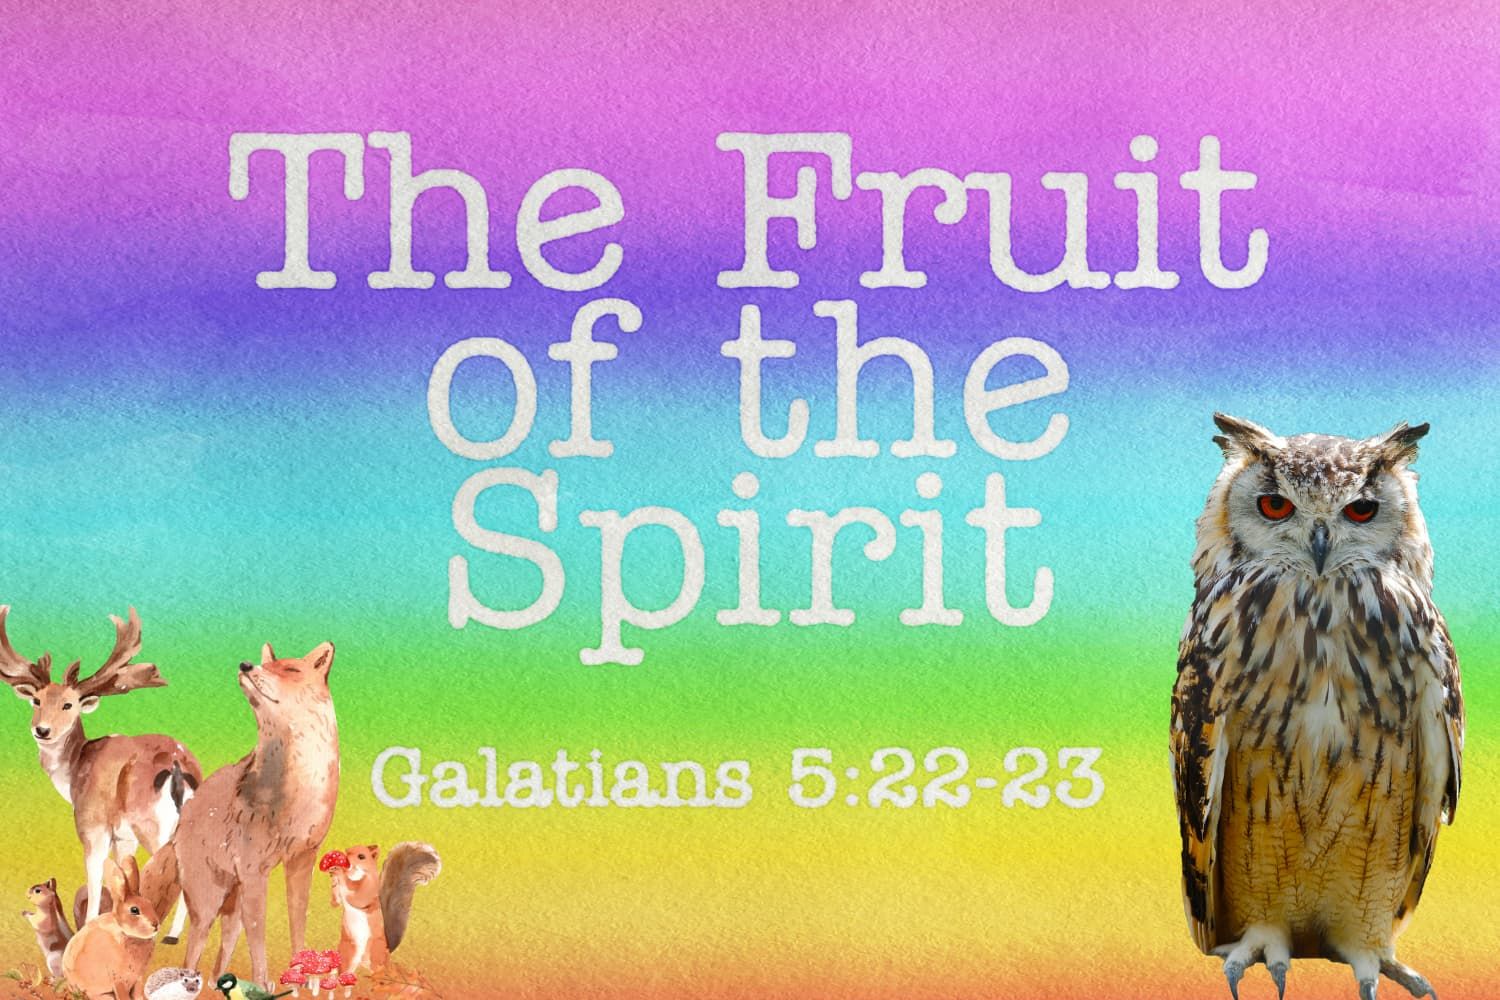 Parable%20-%20Wise%20owl%20and%20fruit%20of%20the%20spirit-d9417540 Patience / impatience